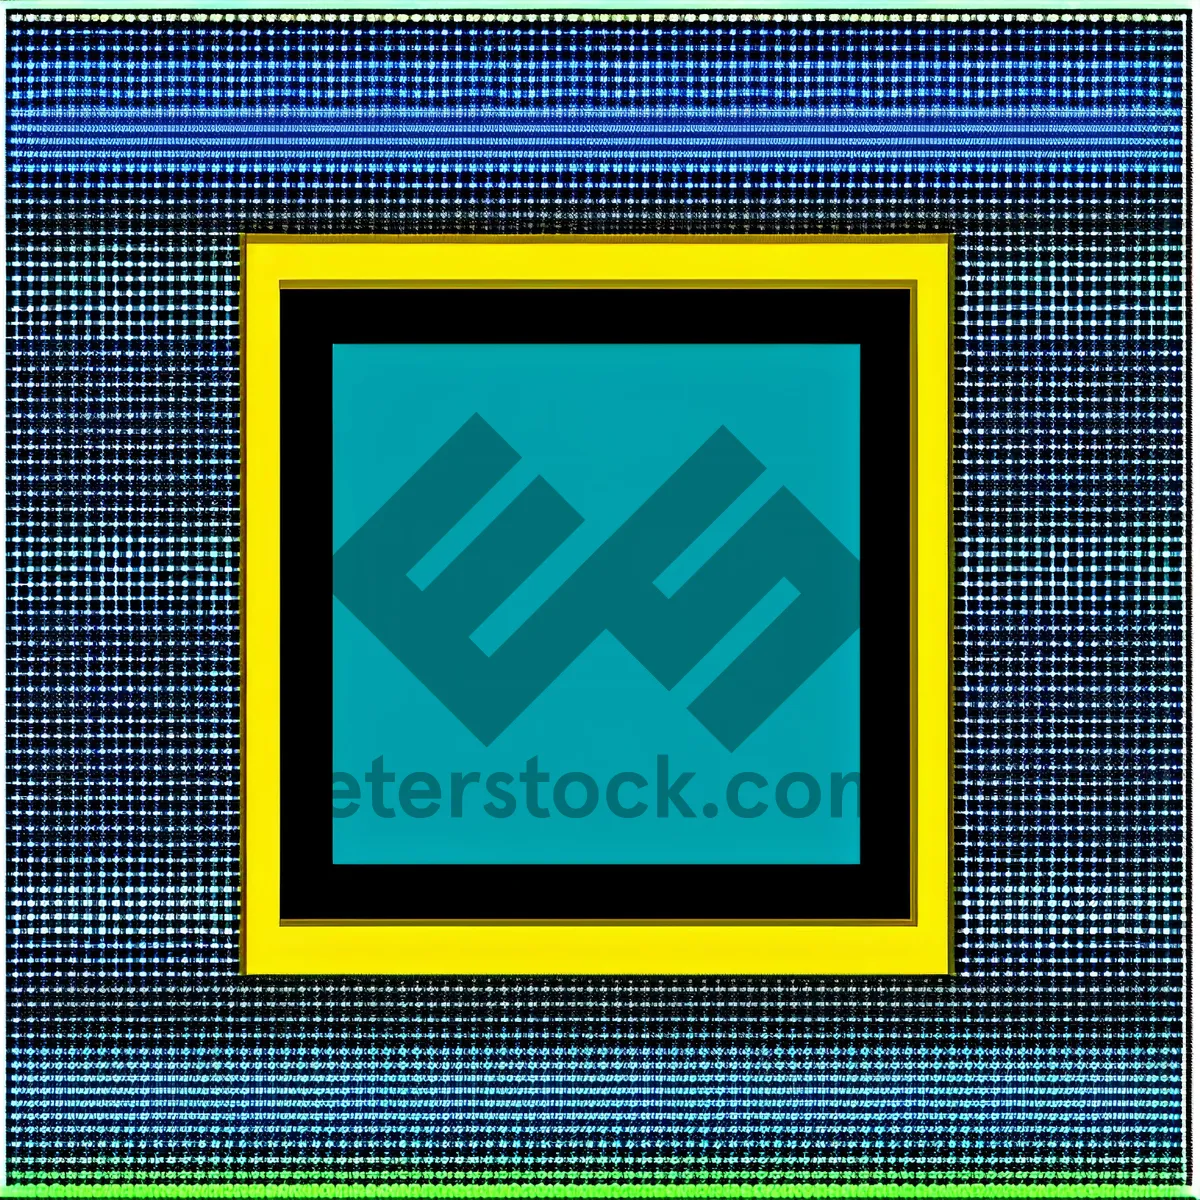 Picture of Vintage Grunge Pixelated Square Frame Design